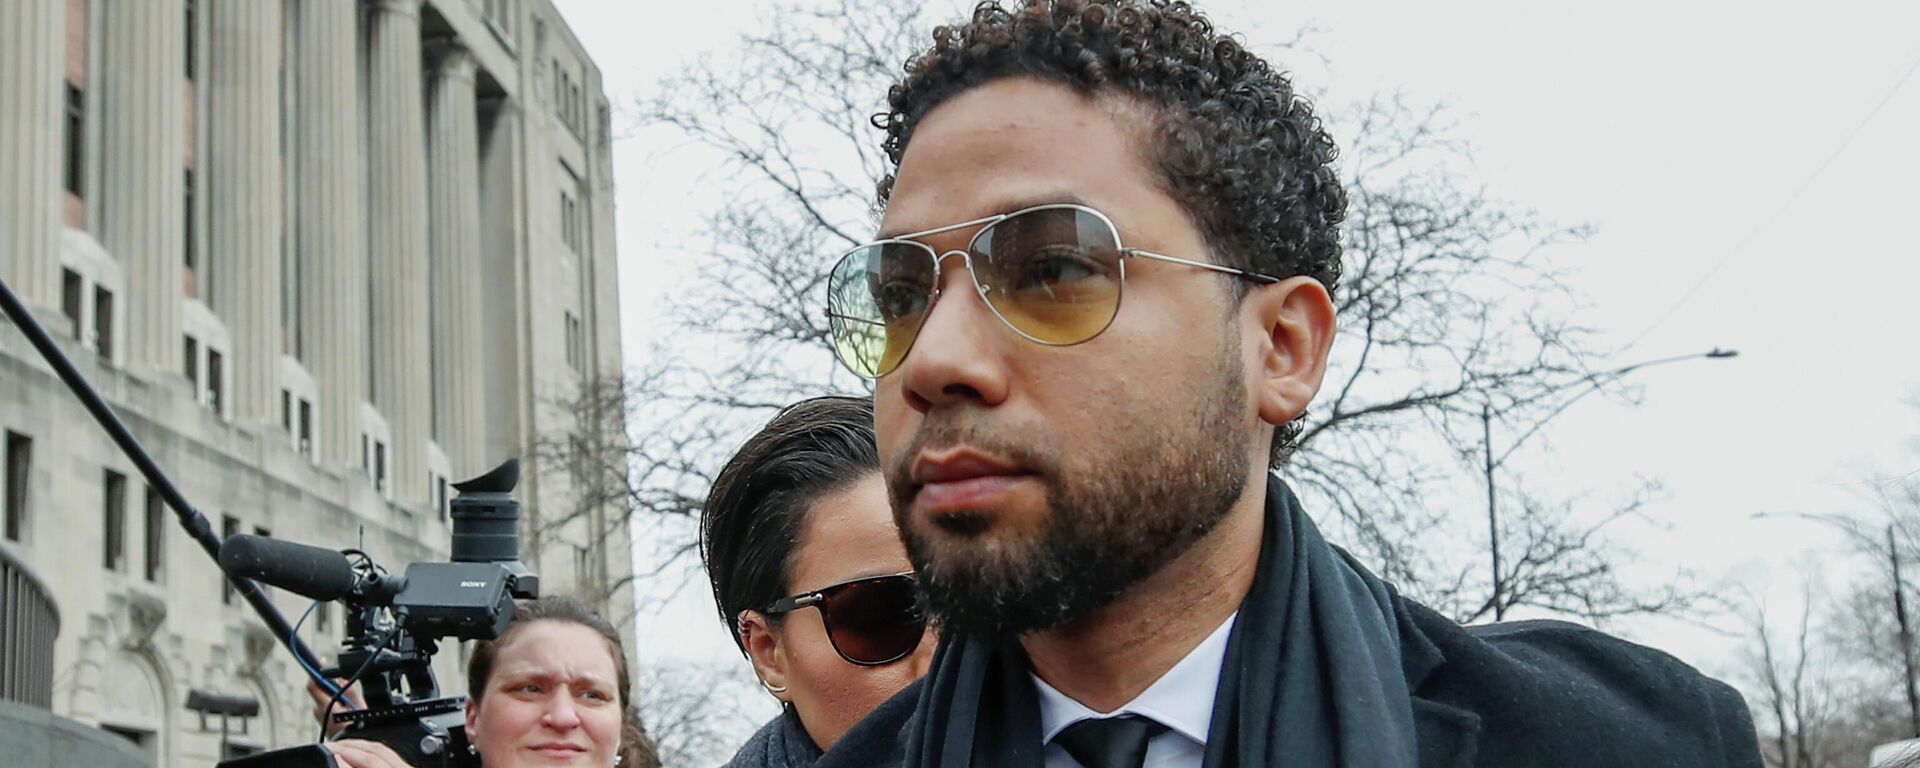 FILE PHOTO: Former Empire actor Jussie Smollett arrives at court for his arraignment on renewed felony charges in Chicago, Illinois, U.S. February 24, 2020 - Sputnik International, 1920, 30.11.2021